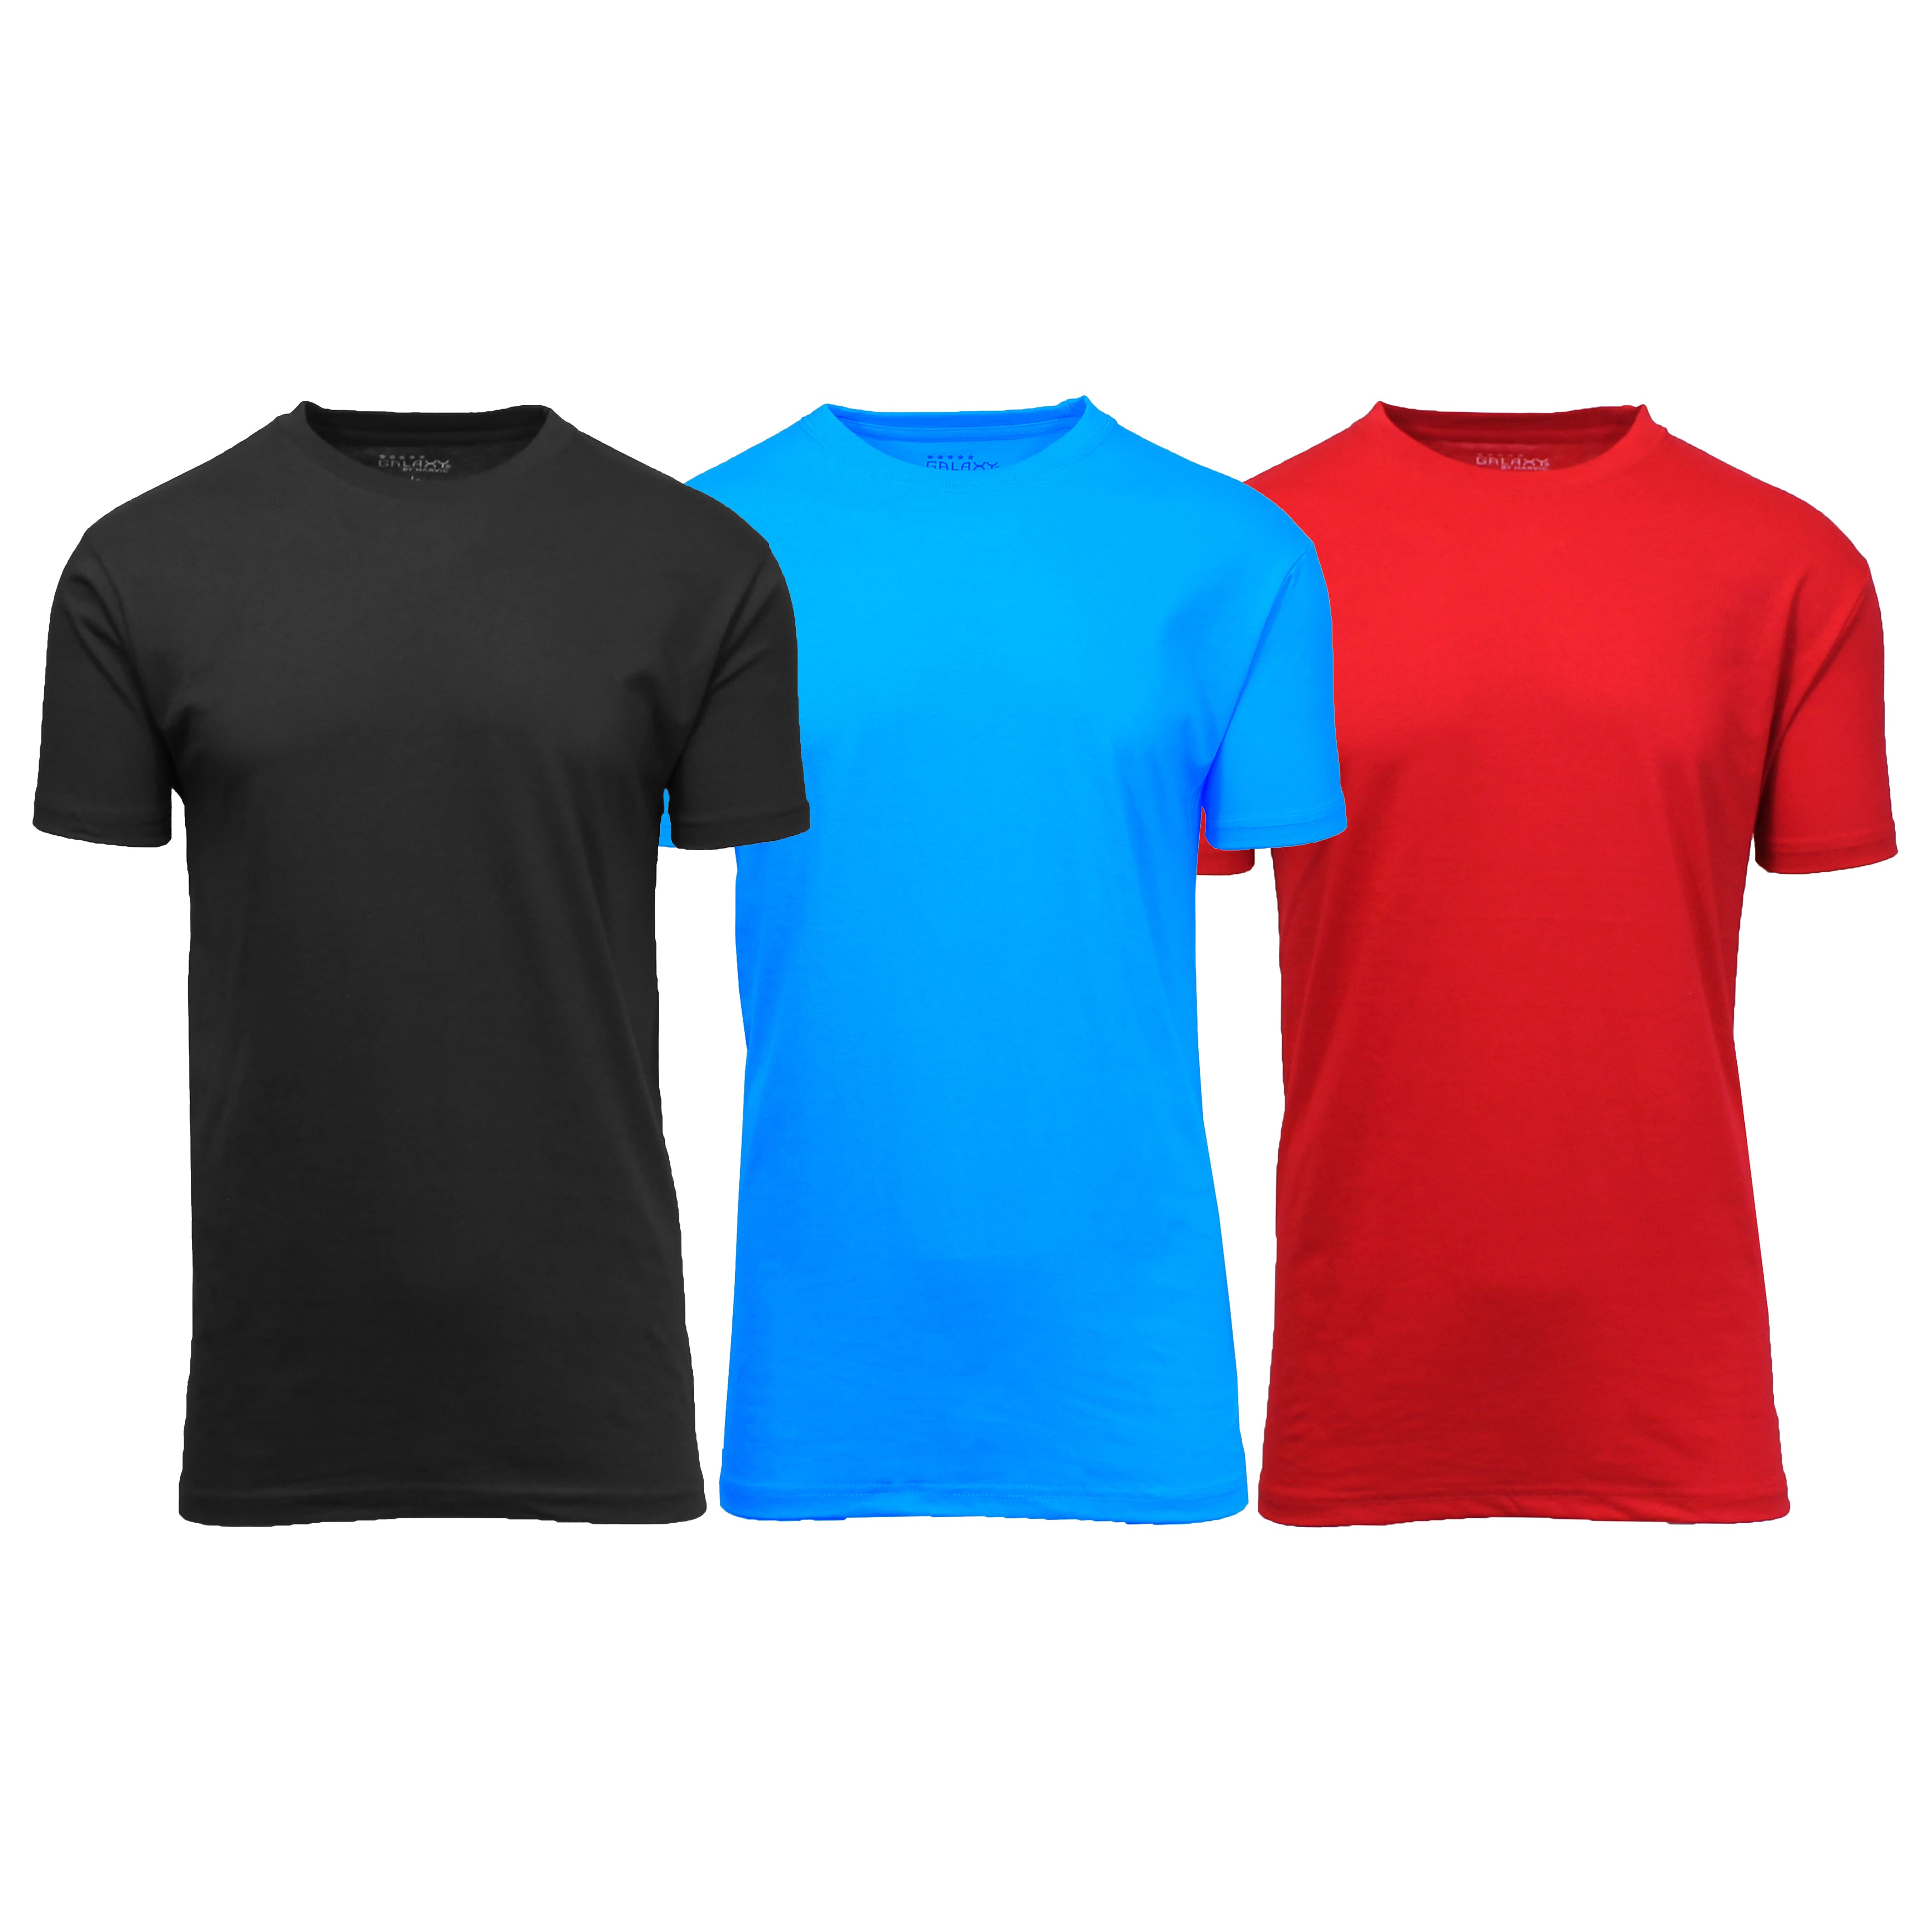 Galaxy By Harvic Crew Neck Men's T-Shirt 3 Pack | Michaels